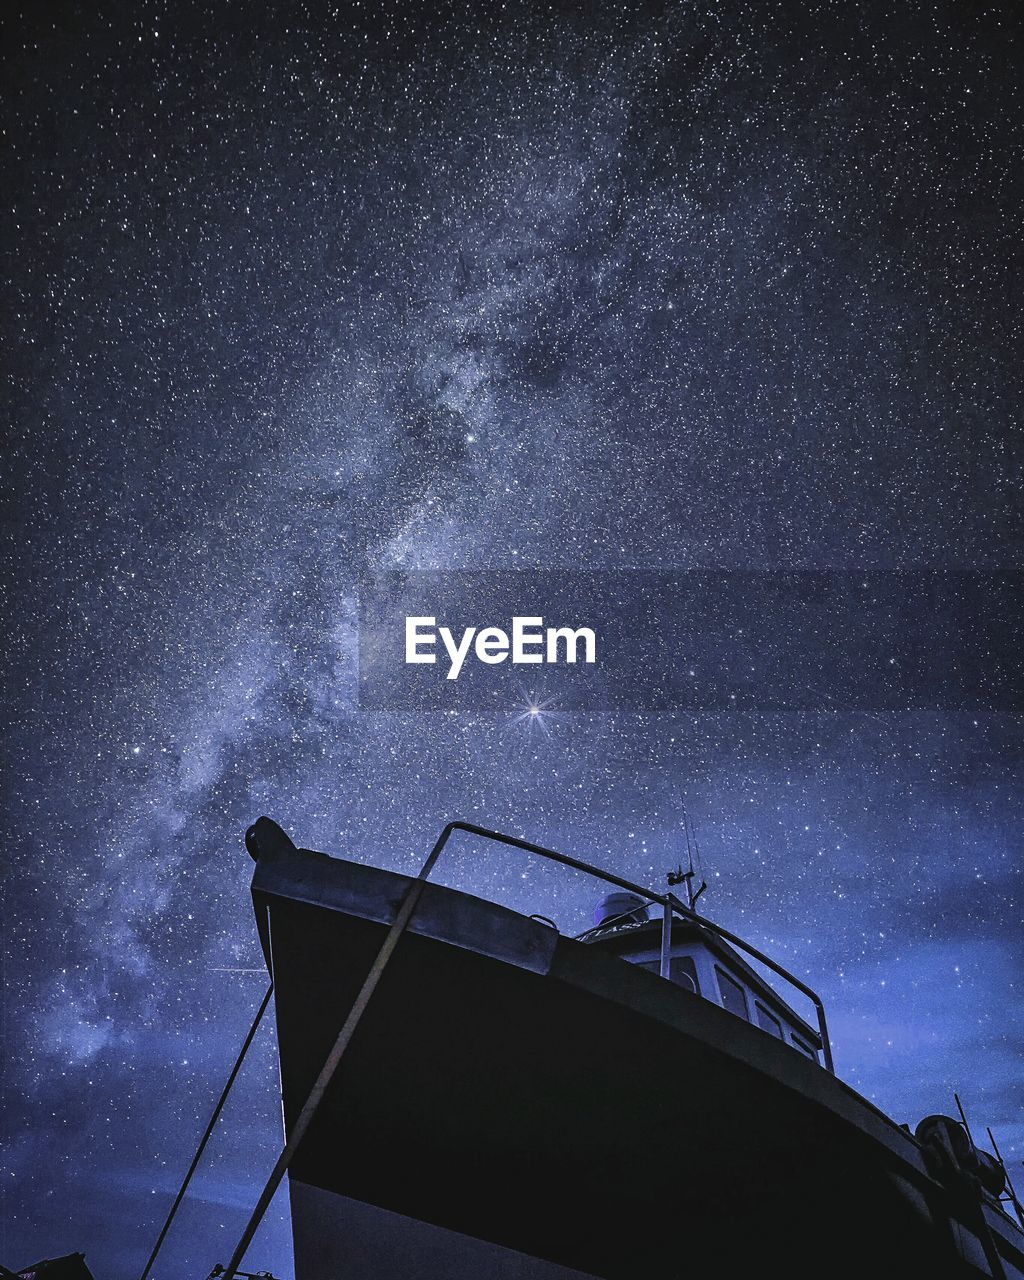 Low angle view of boat against nebula in sky at night